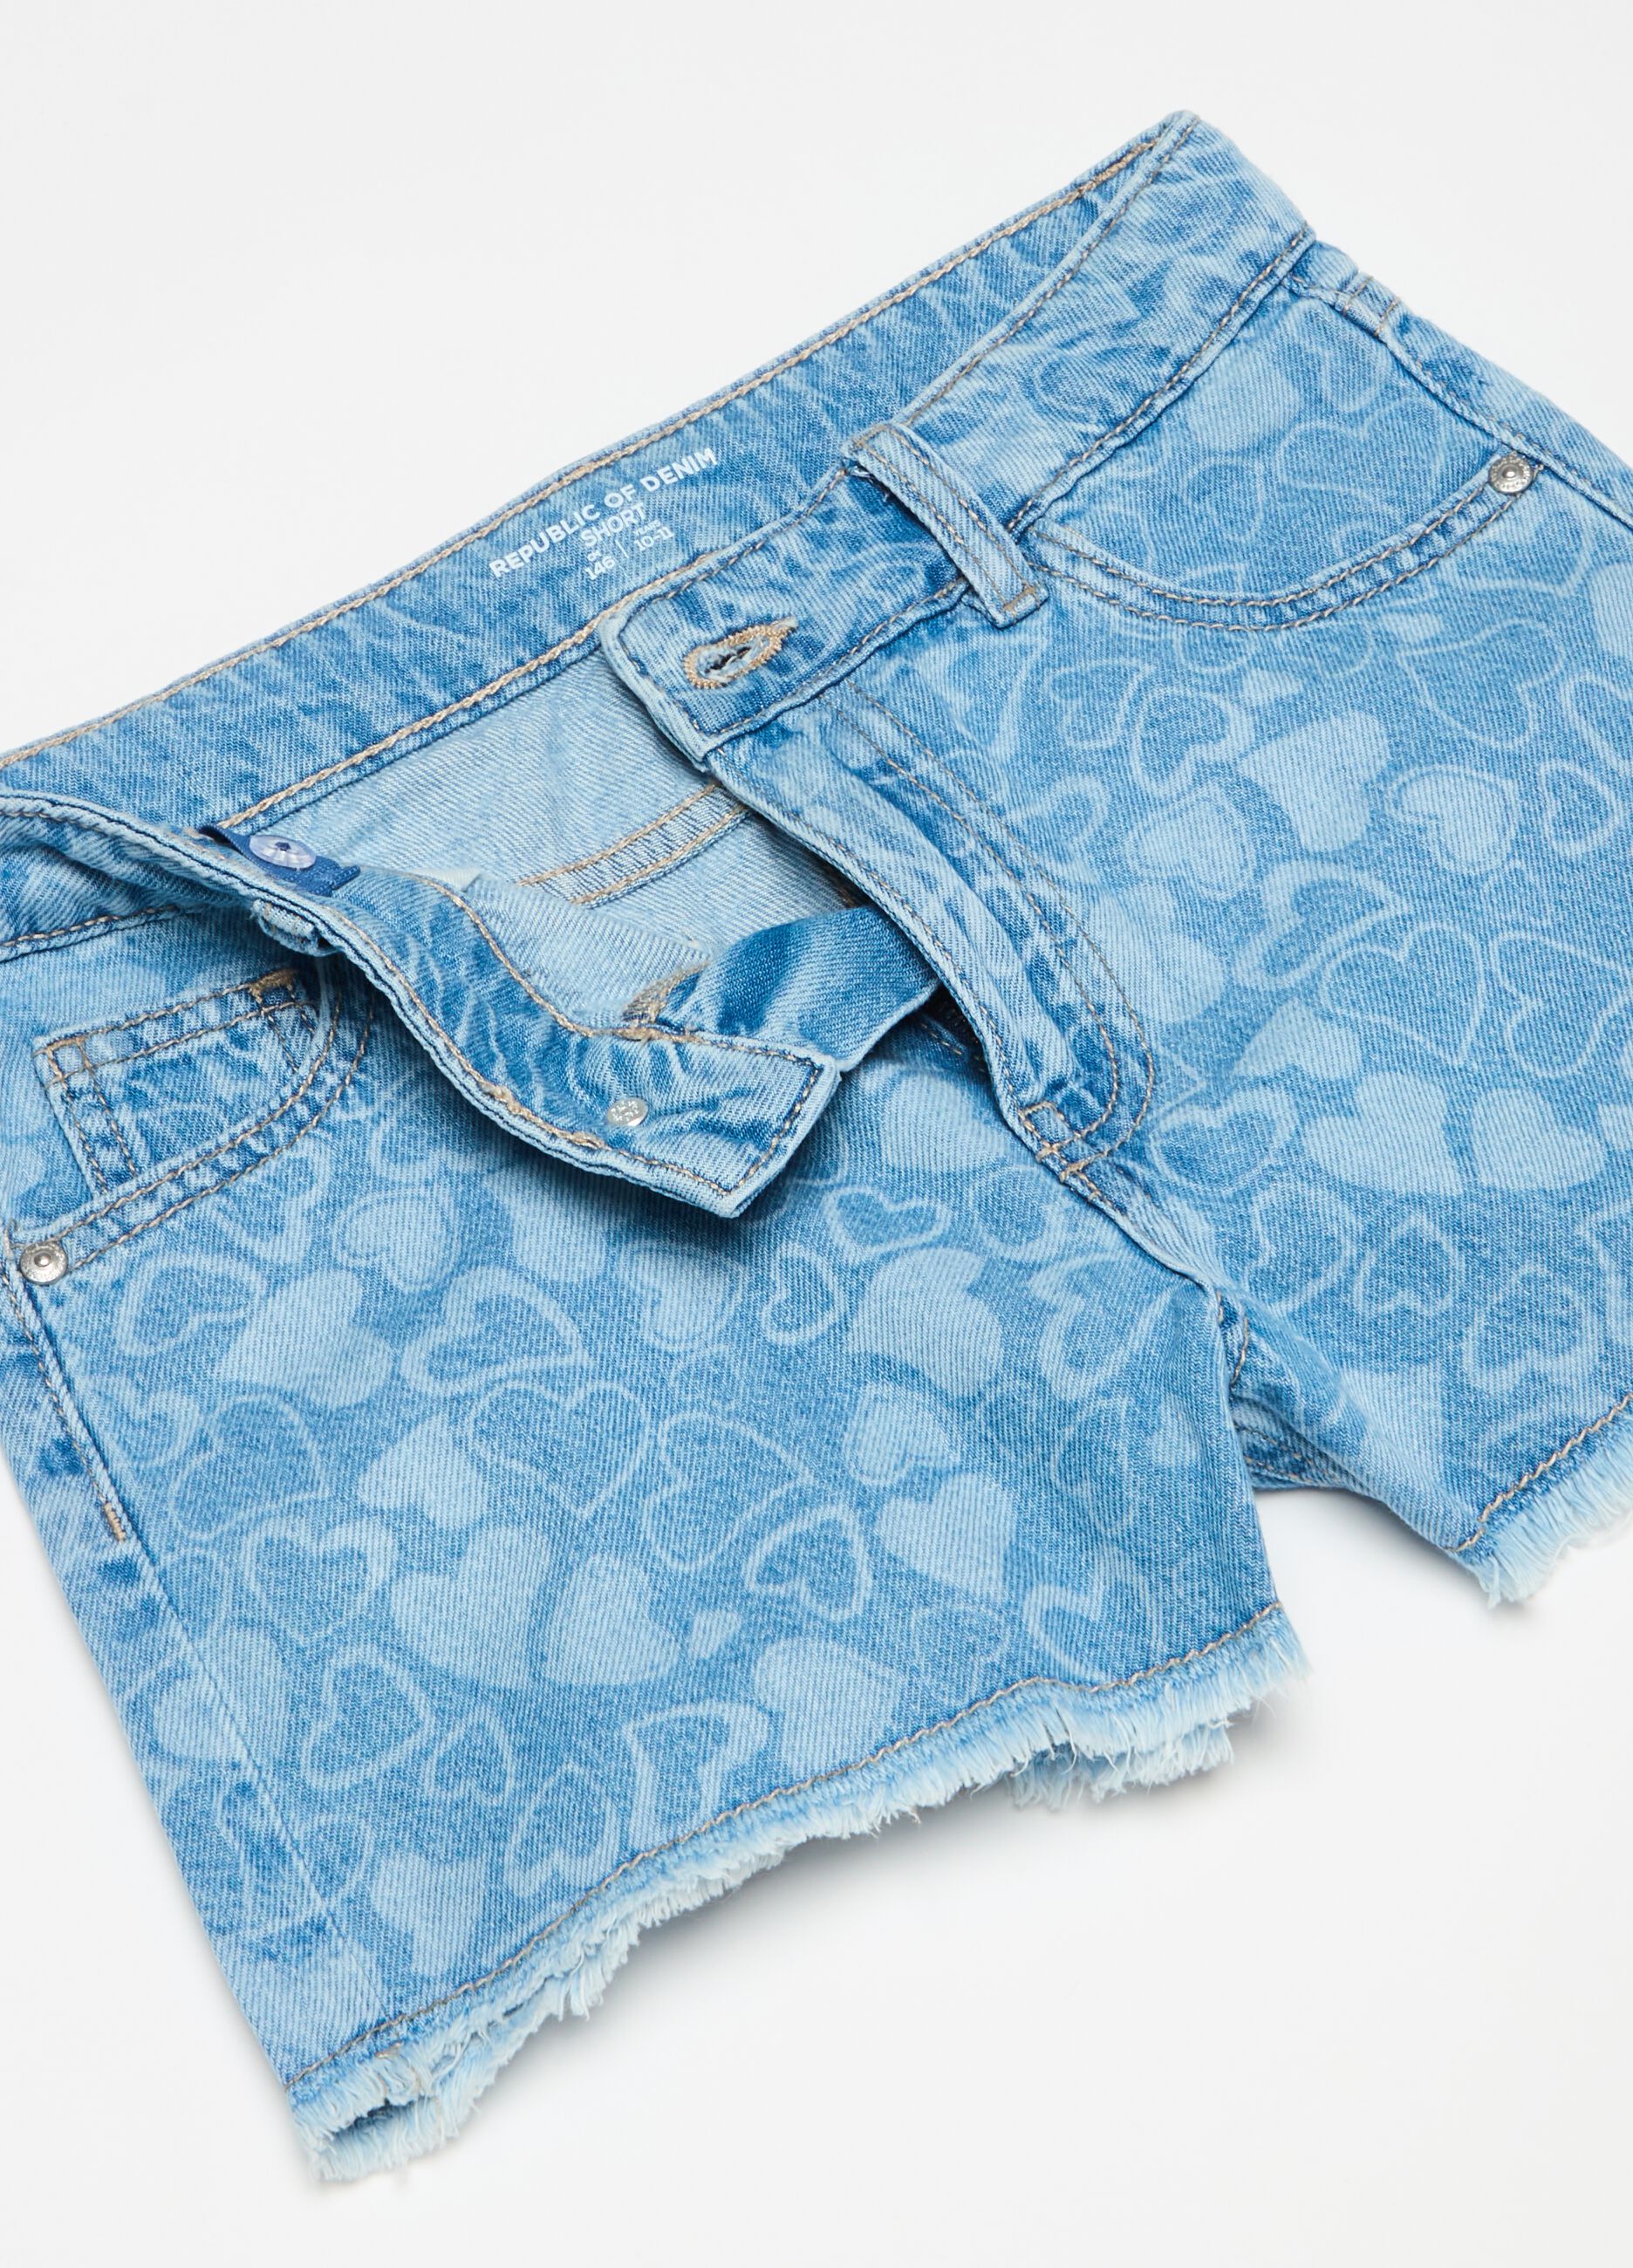 Denim shorts with all-over hearts print